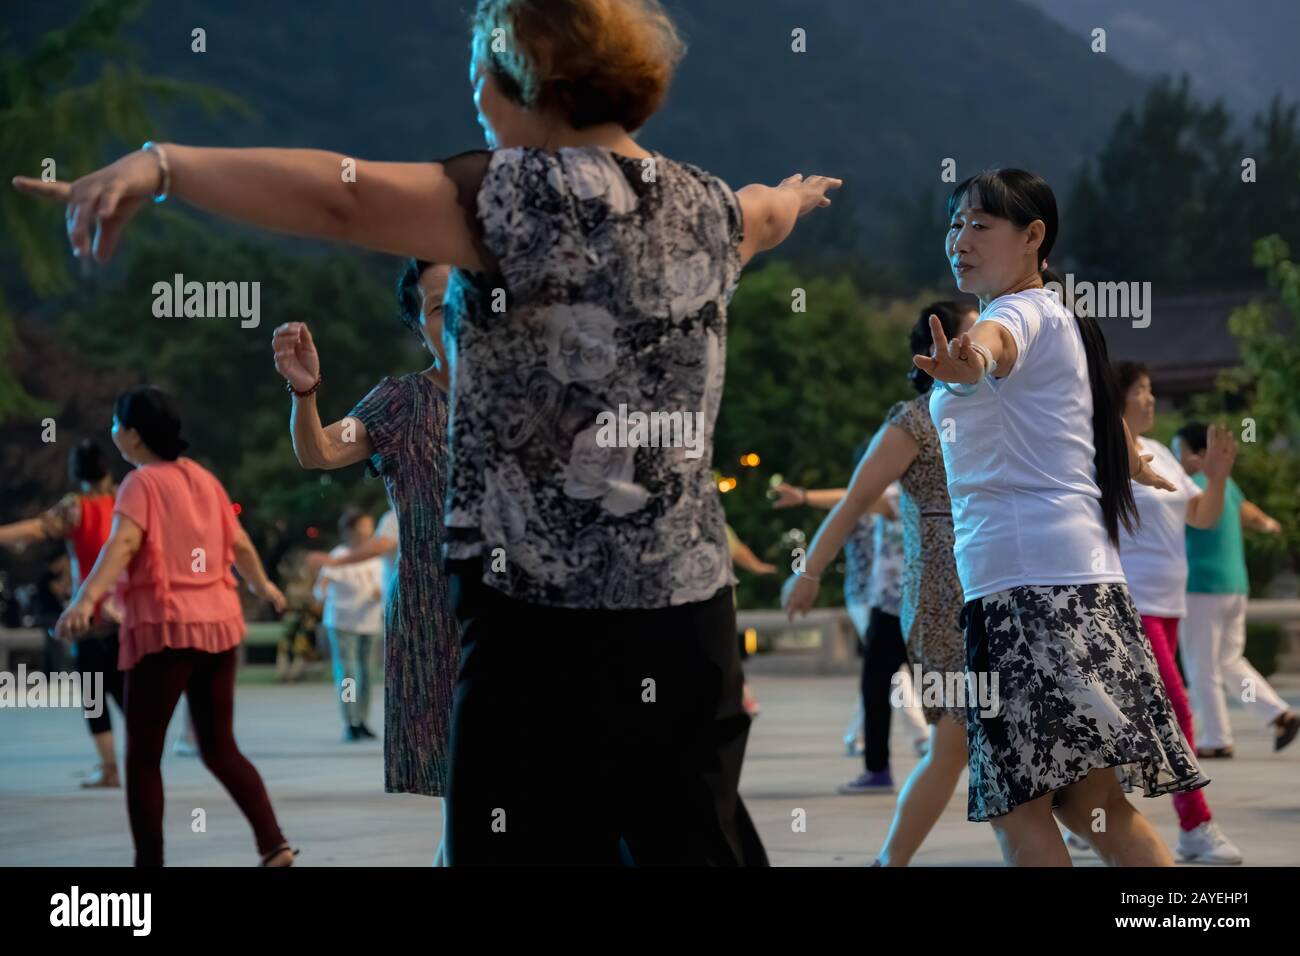 Group of Chinese women dancing in the evening Stock Photo